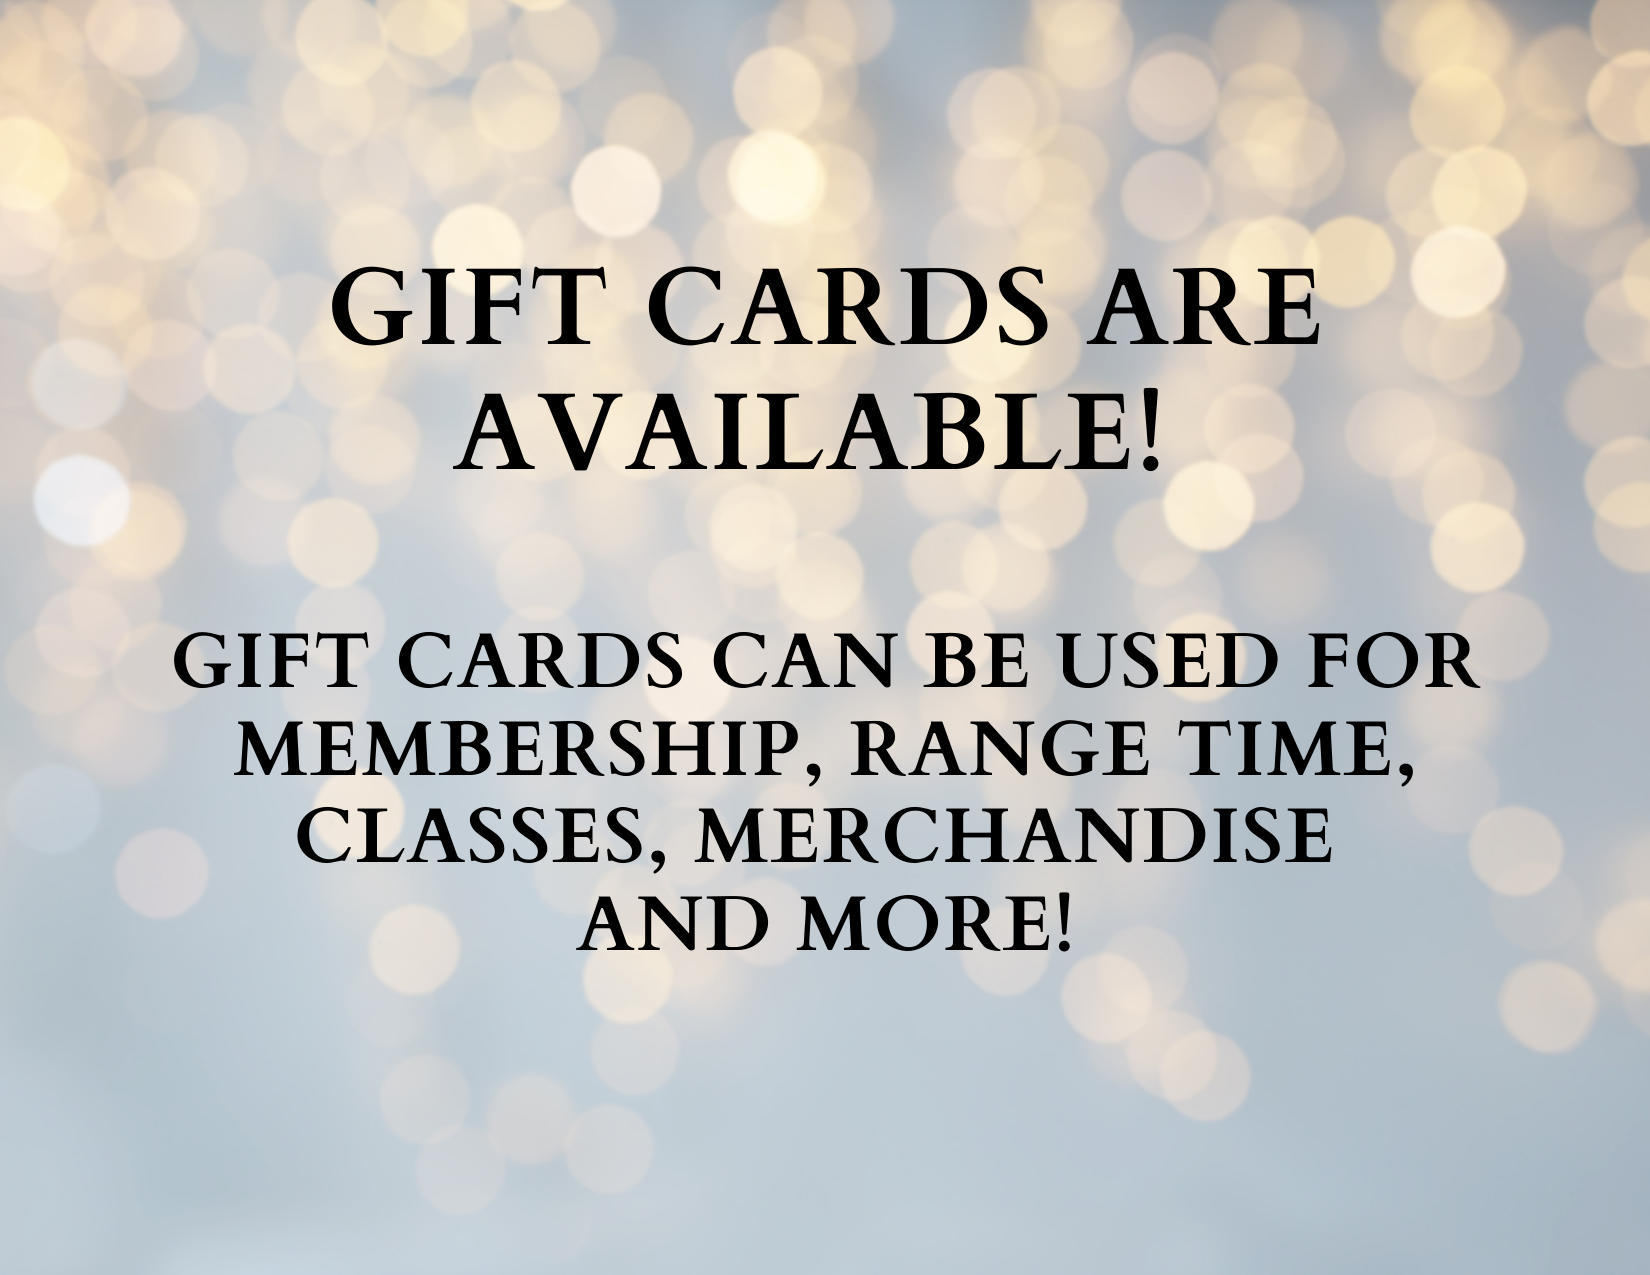 Online Gift Cards Are Available for The Range. Get Yours Here!